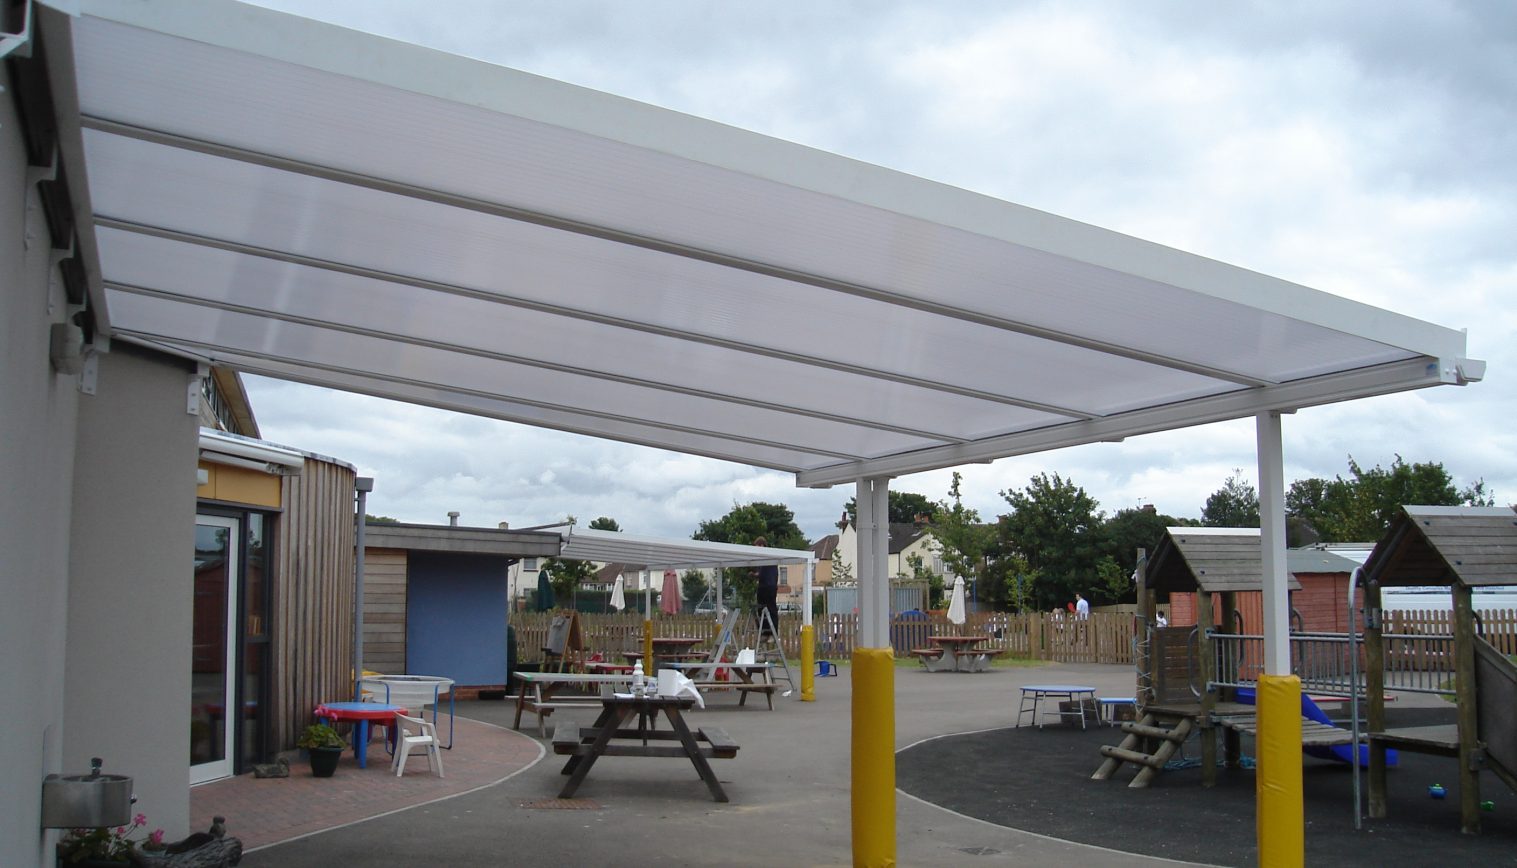 Upland Primary School – Wall Mounted Canopy